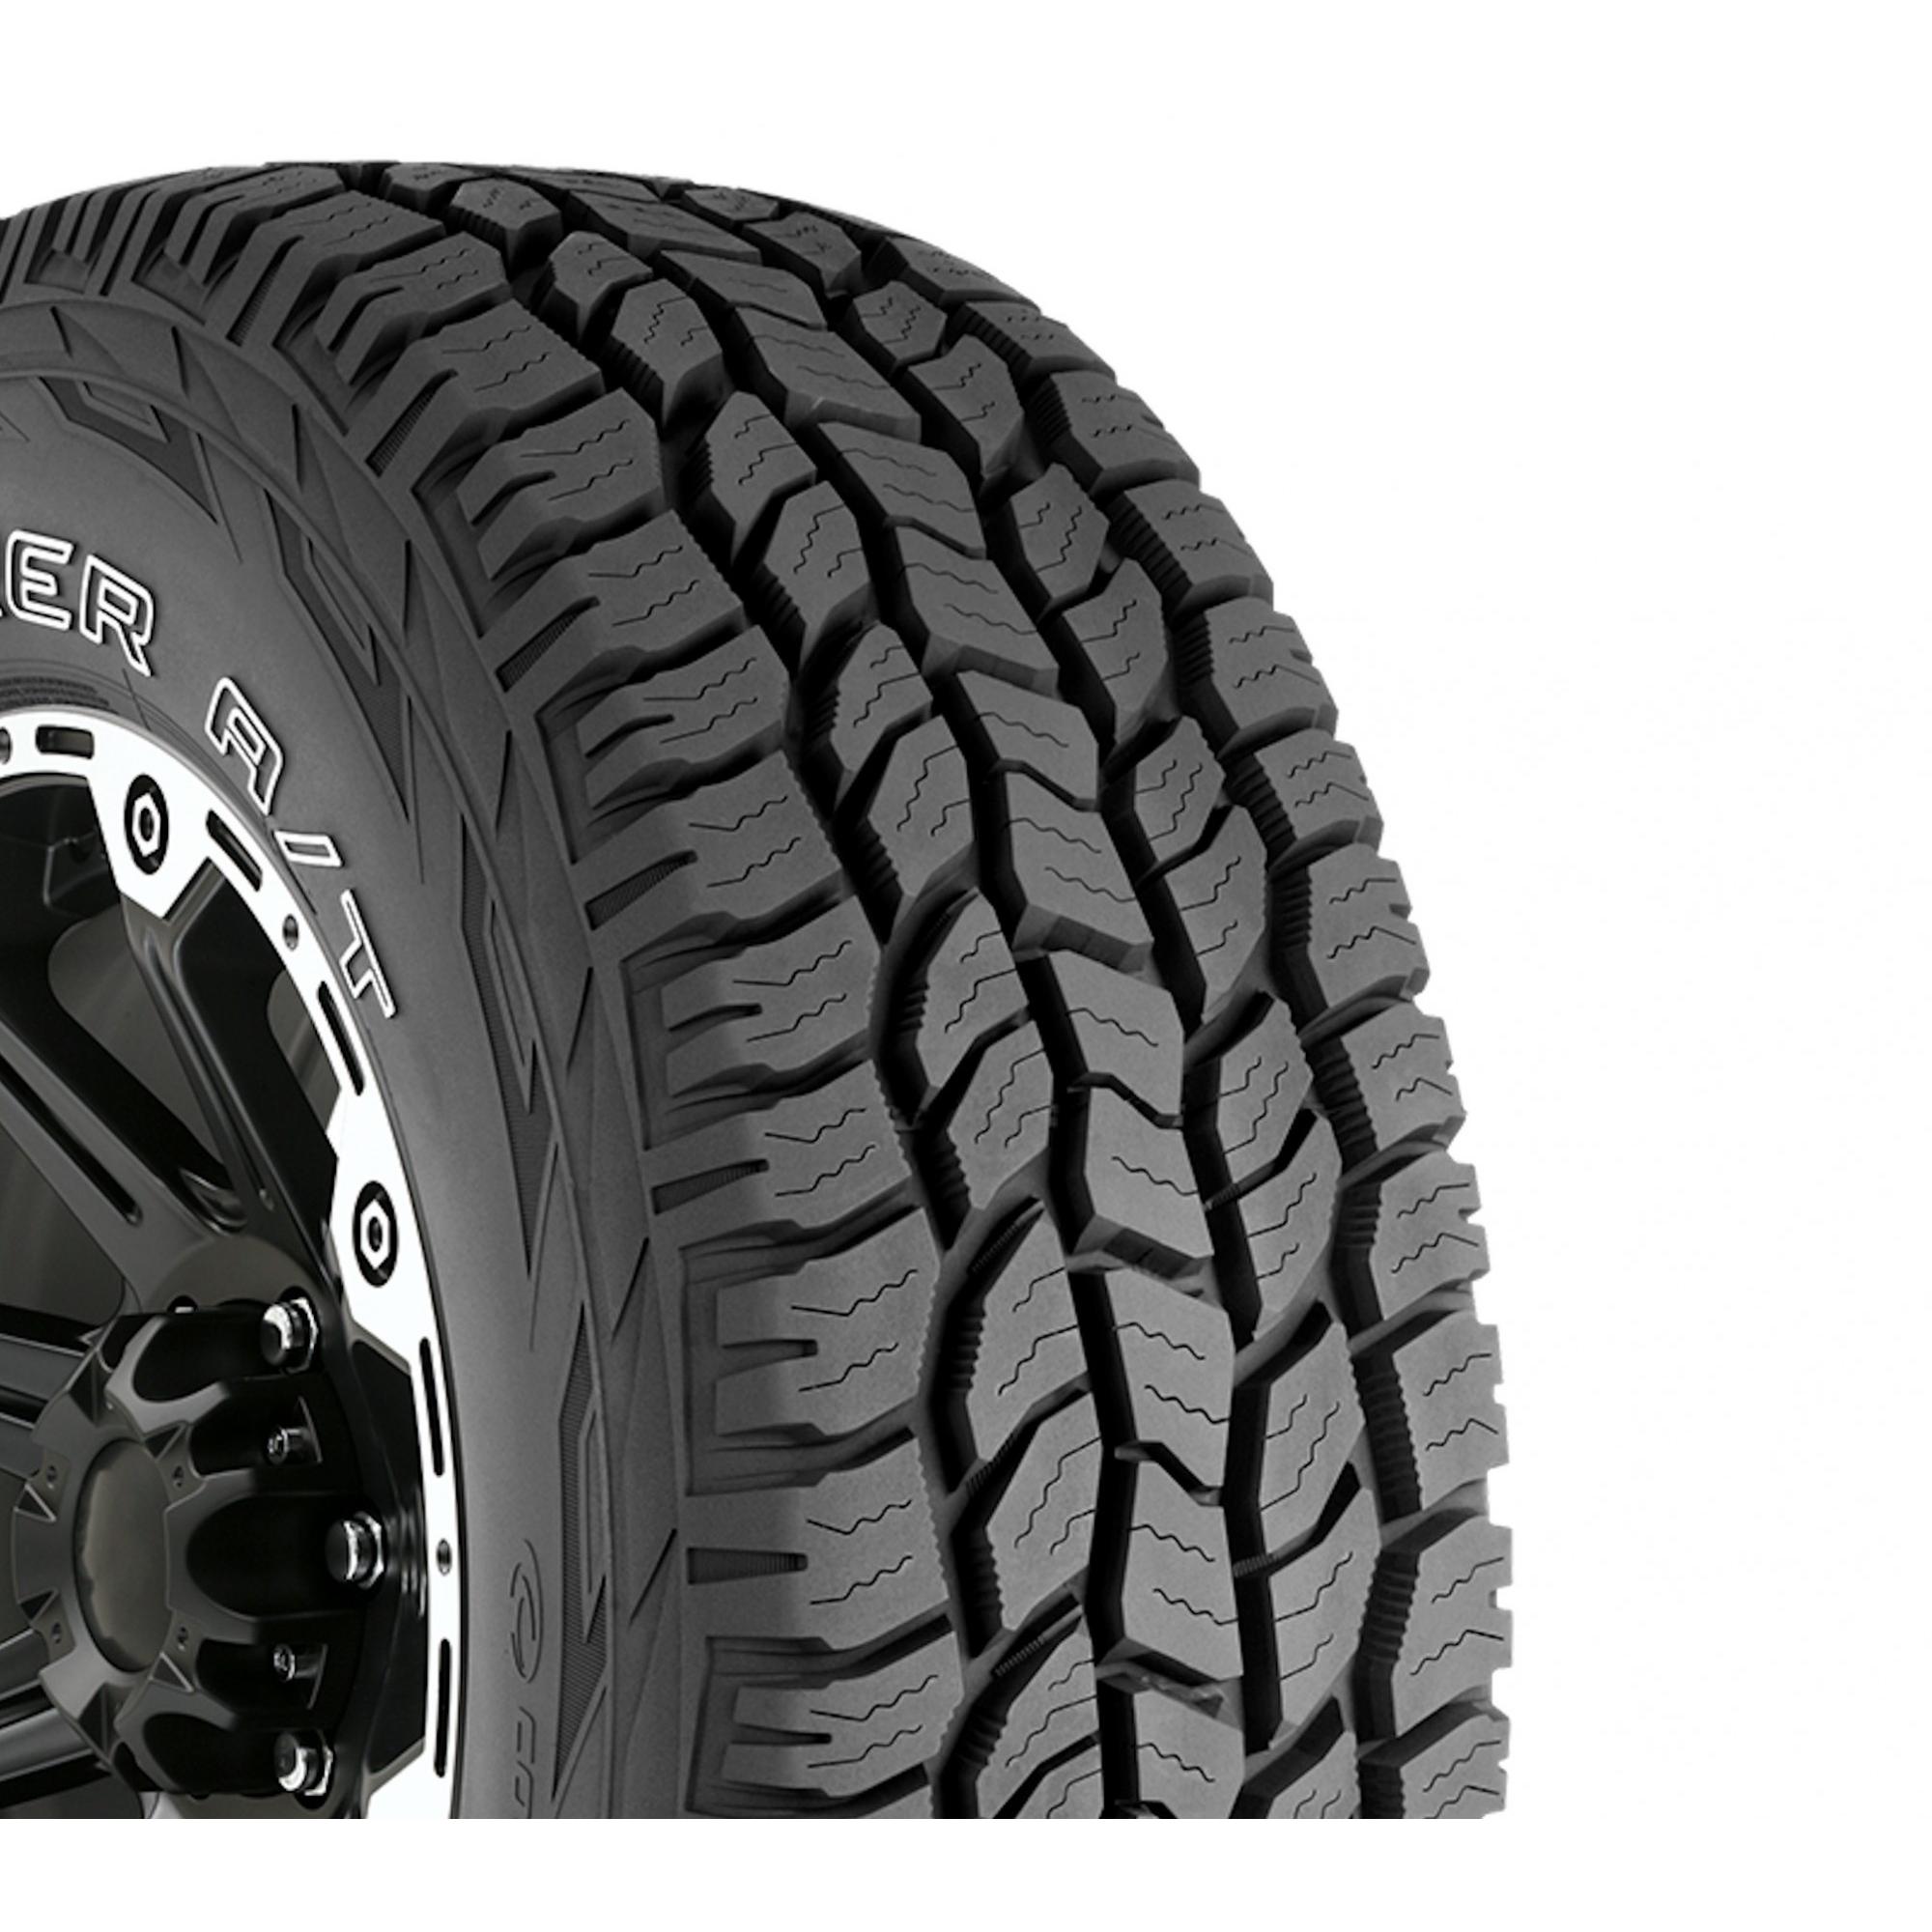 Cooper Discoverer A/T All-Season 275/55R20 117T Tire Fits: 2014-18 Chevrolet Silverado 1500 High Country, 2011-18 GMC Sierra 1500 Denali - image 8 of 8